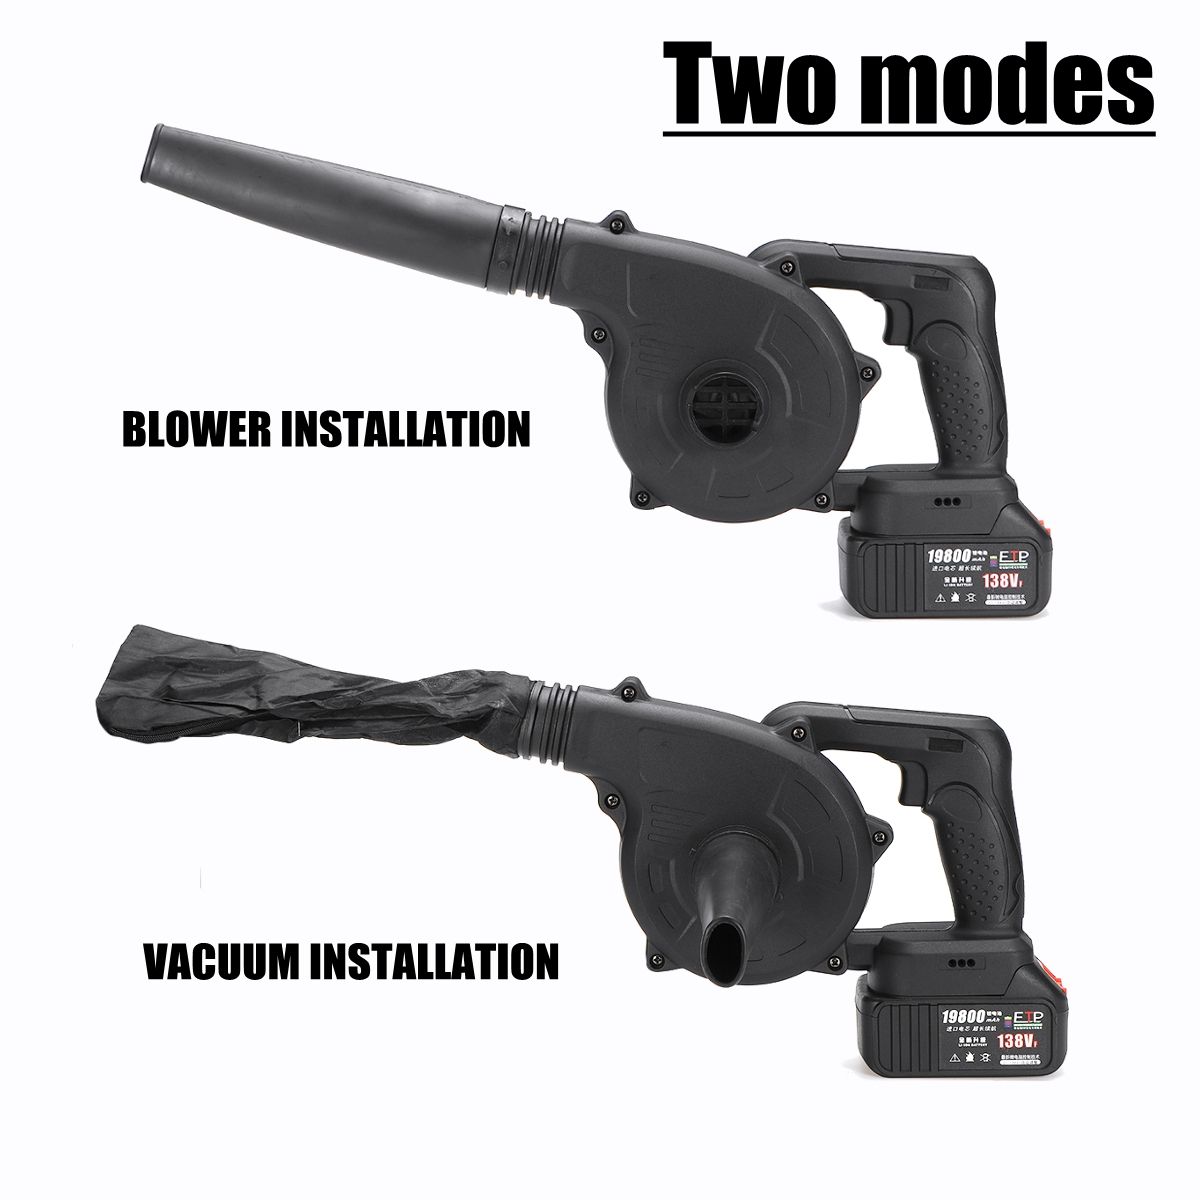 220V-128VF-19800mAh-Cordless-Electric-Air-Blower-Blowing-and-Sucking-Dual-useDust-Computer-cleaner-E-1579909